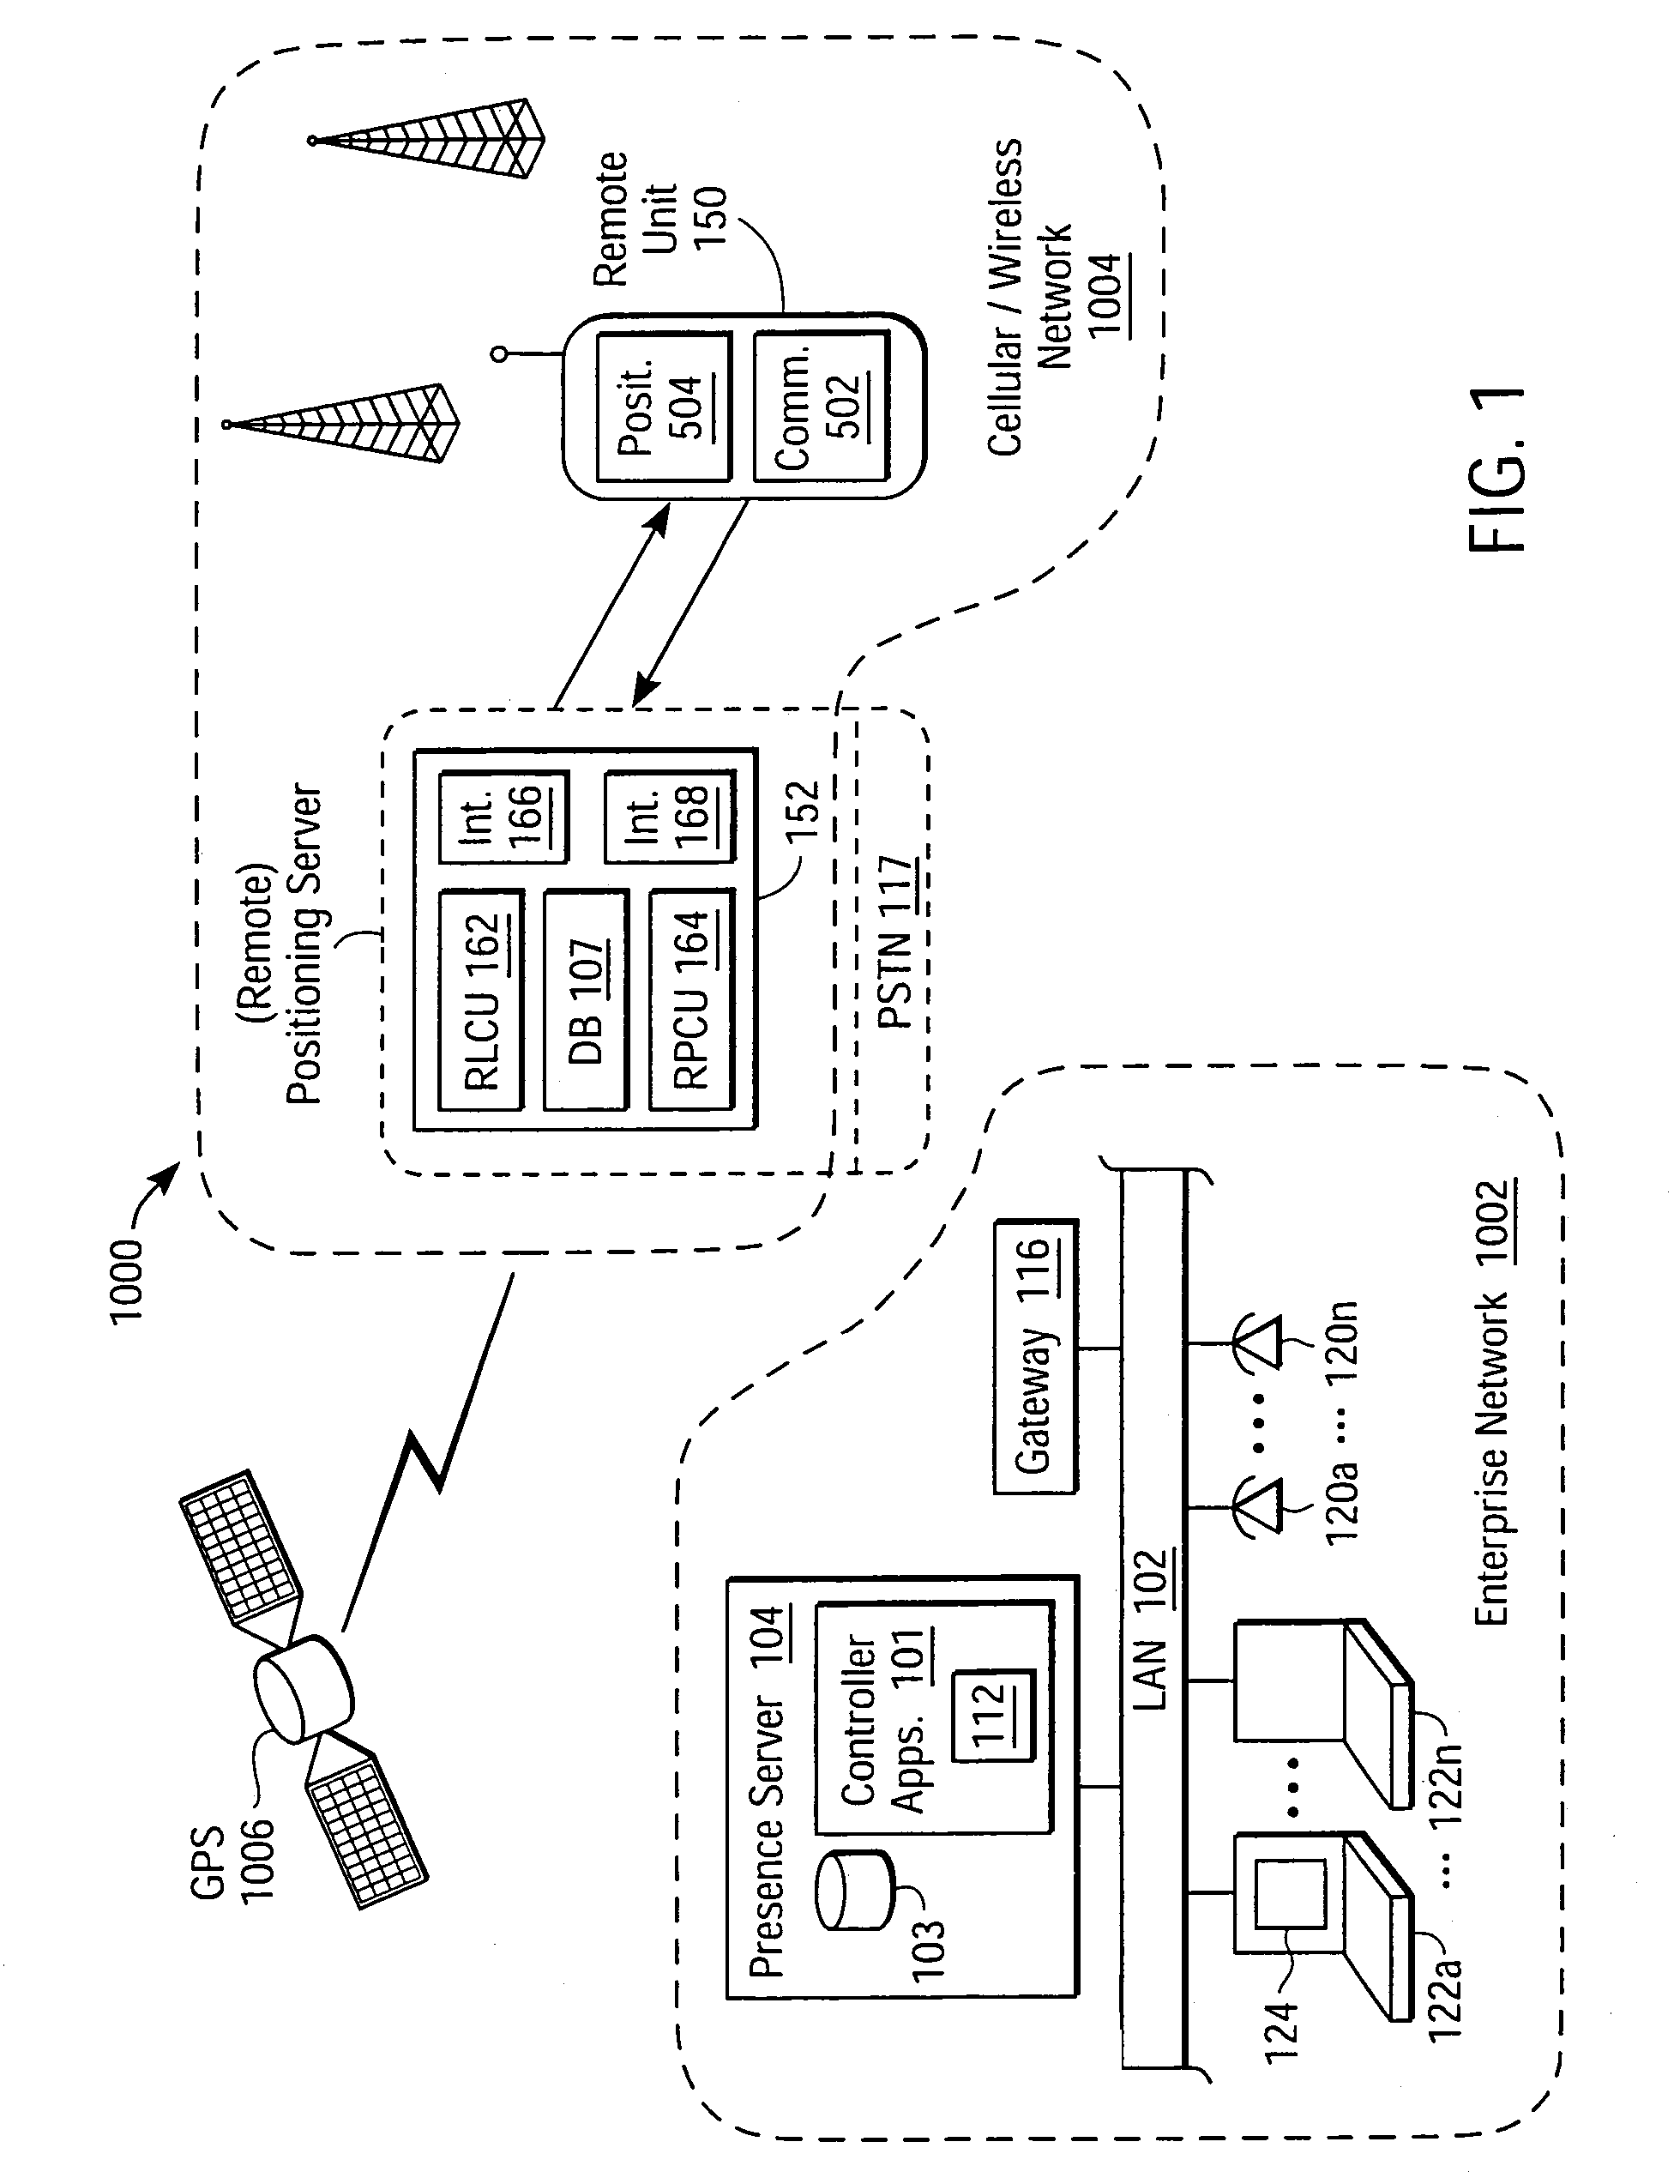 System and method for presence-based area monitoring